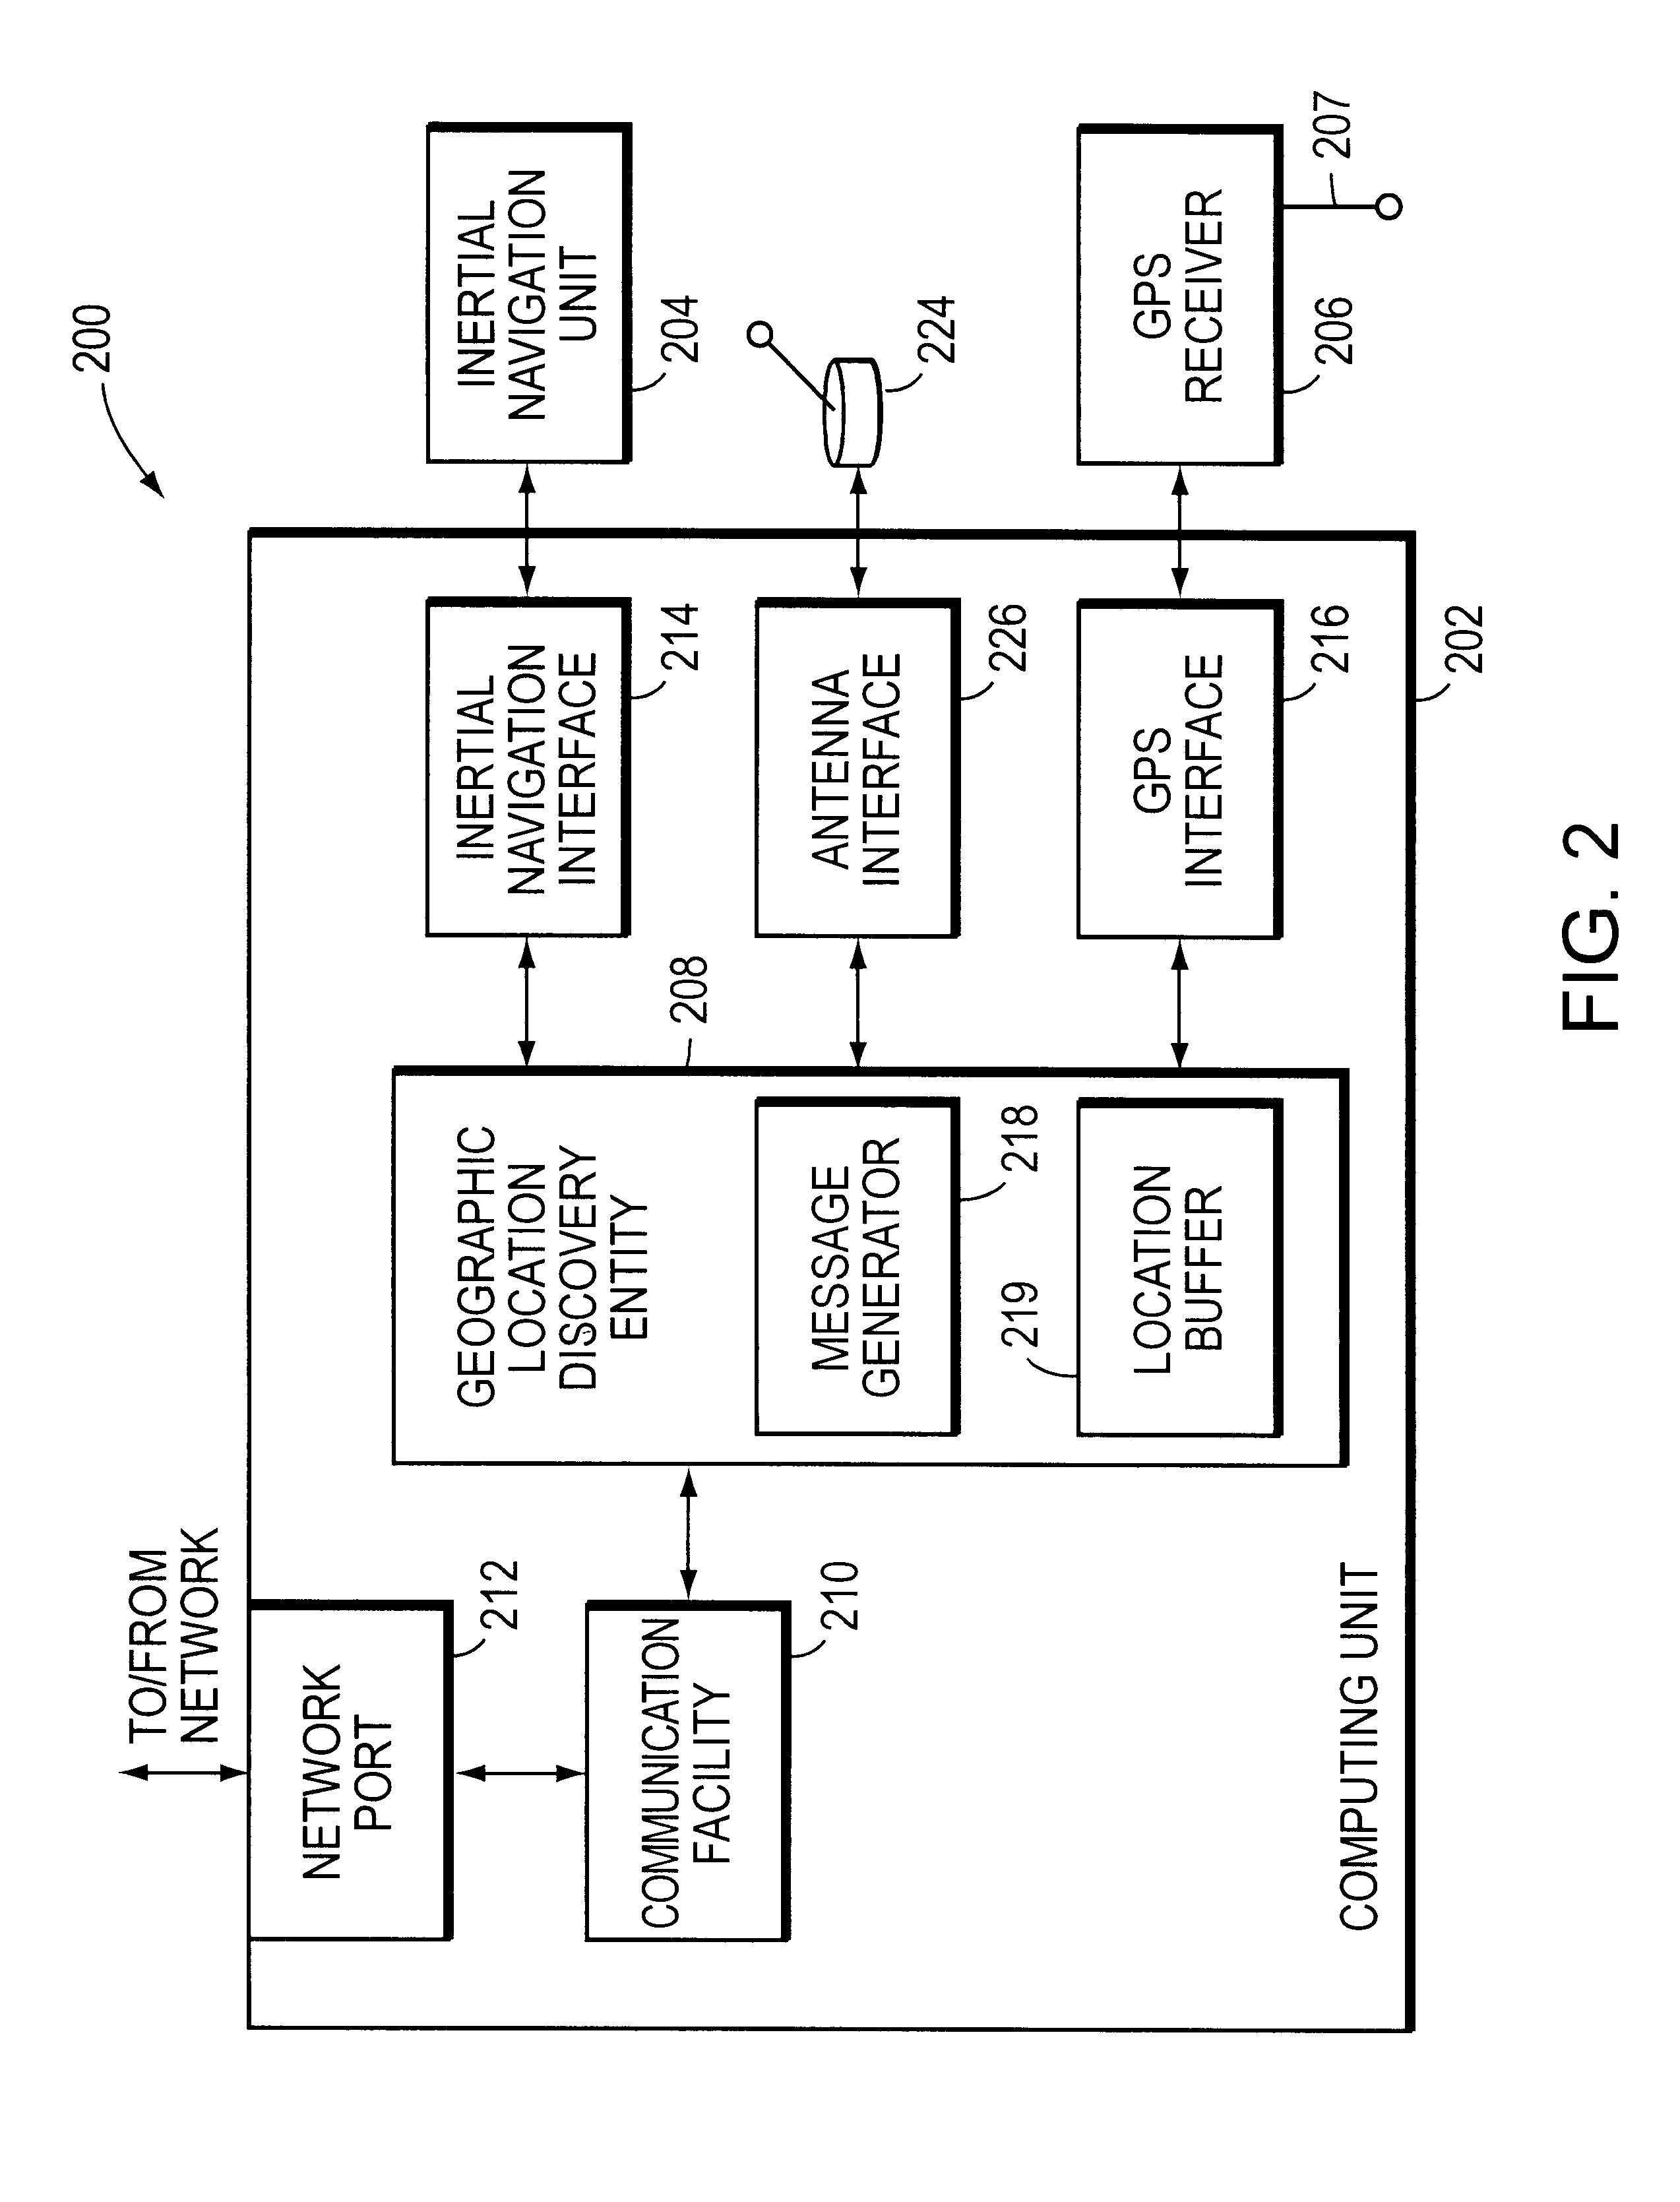 System for discovering and maintaining geographic location information in a computer network to enable emergency services